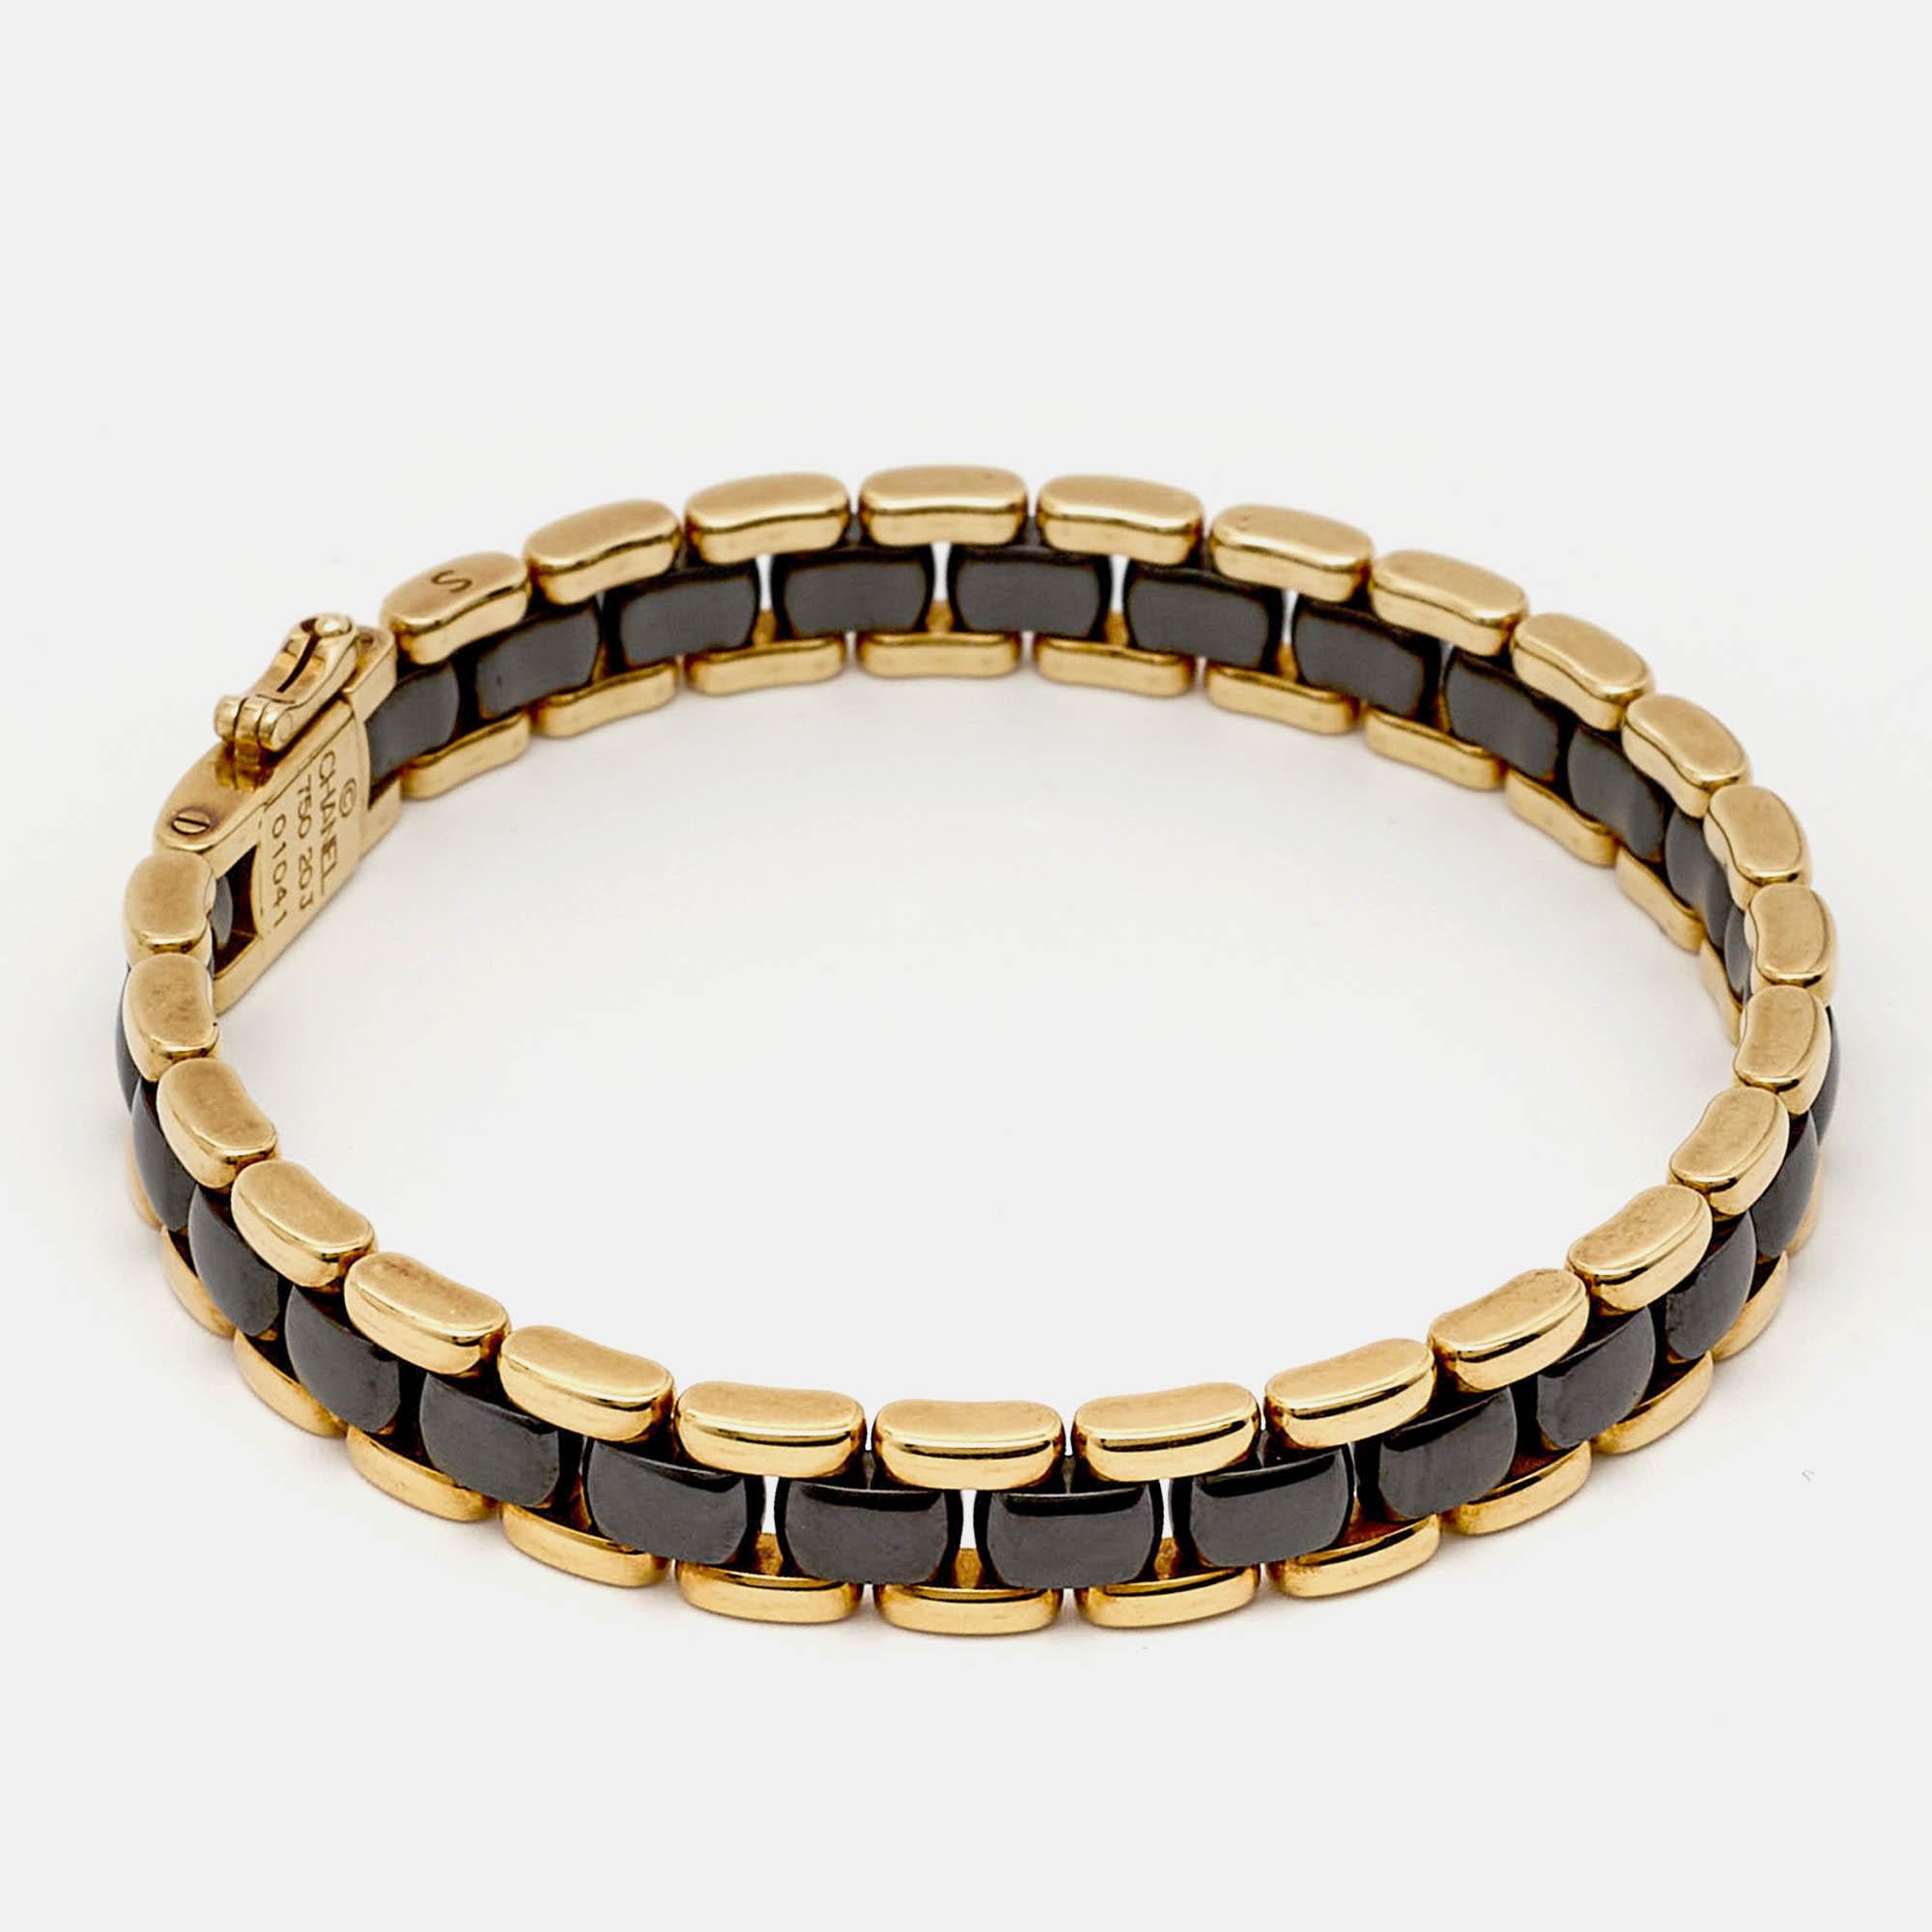 Crafted with care using ceramic and 18k yellow gold, this bracelet has a look that's unmistakably Chanel. The mix of materials gives it the iconic woven chain look.

Includes: Brand Pouch